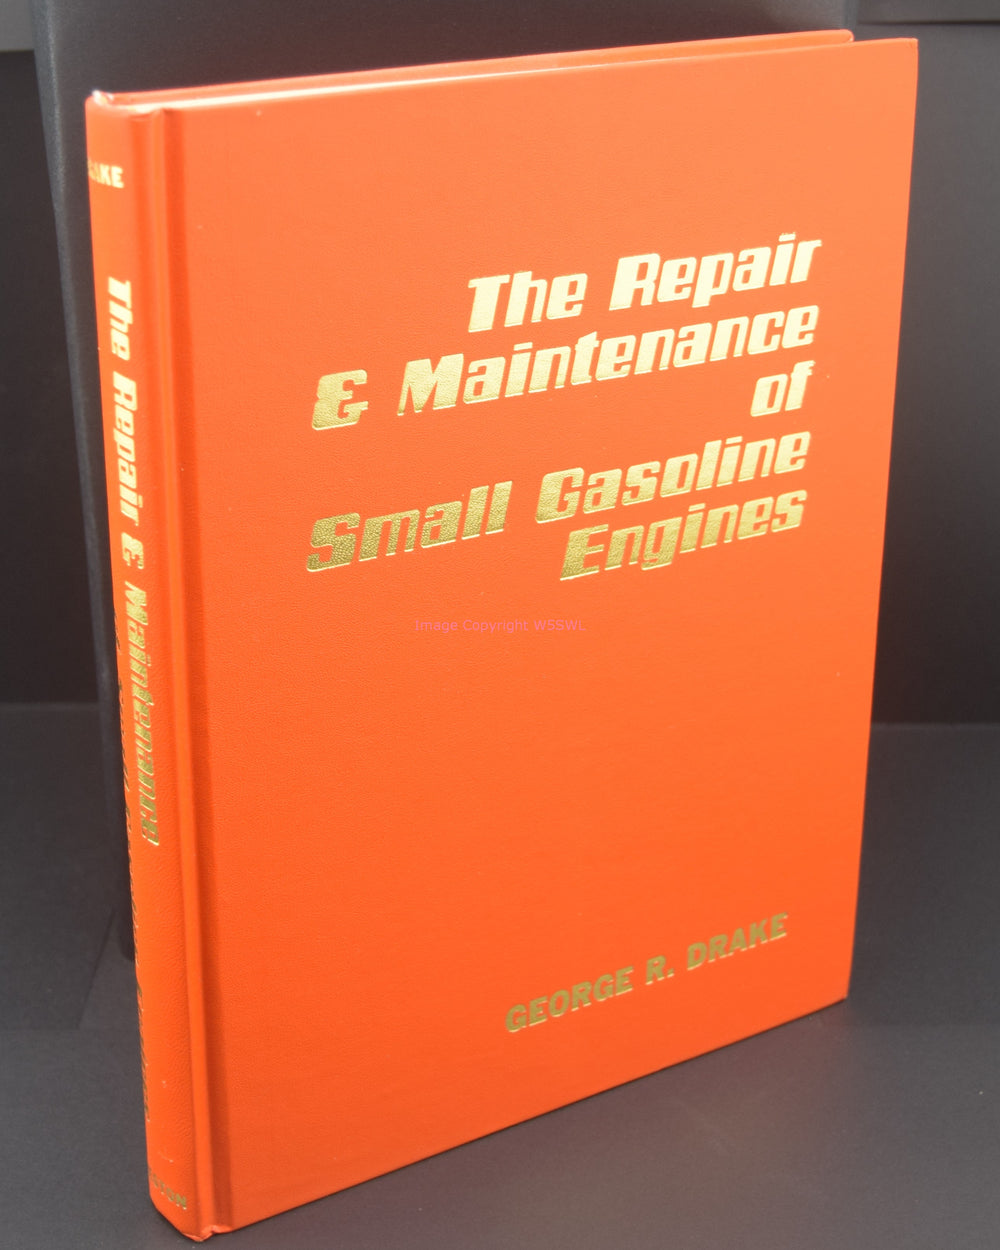 The Repair & Maintenance of Small Gasoline Engines - Dave's Hobby Shop by W5SWL